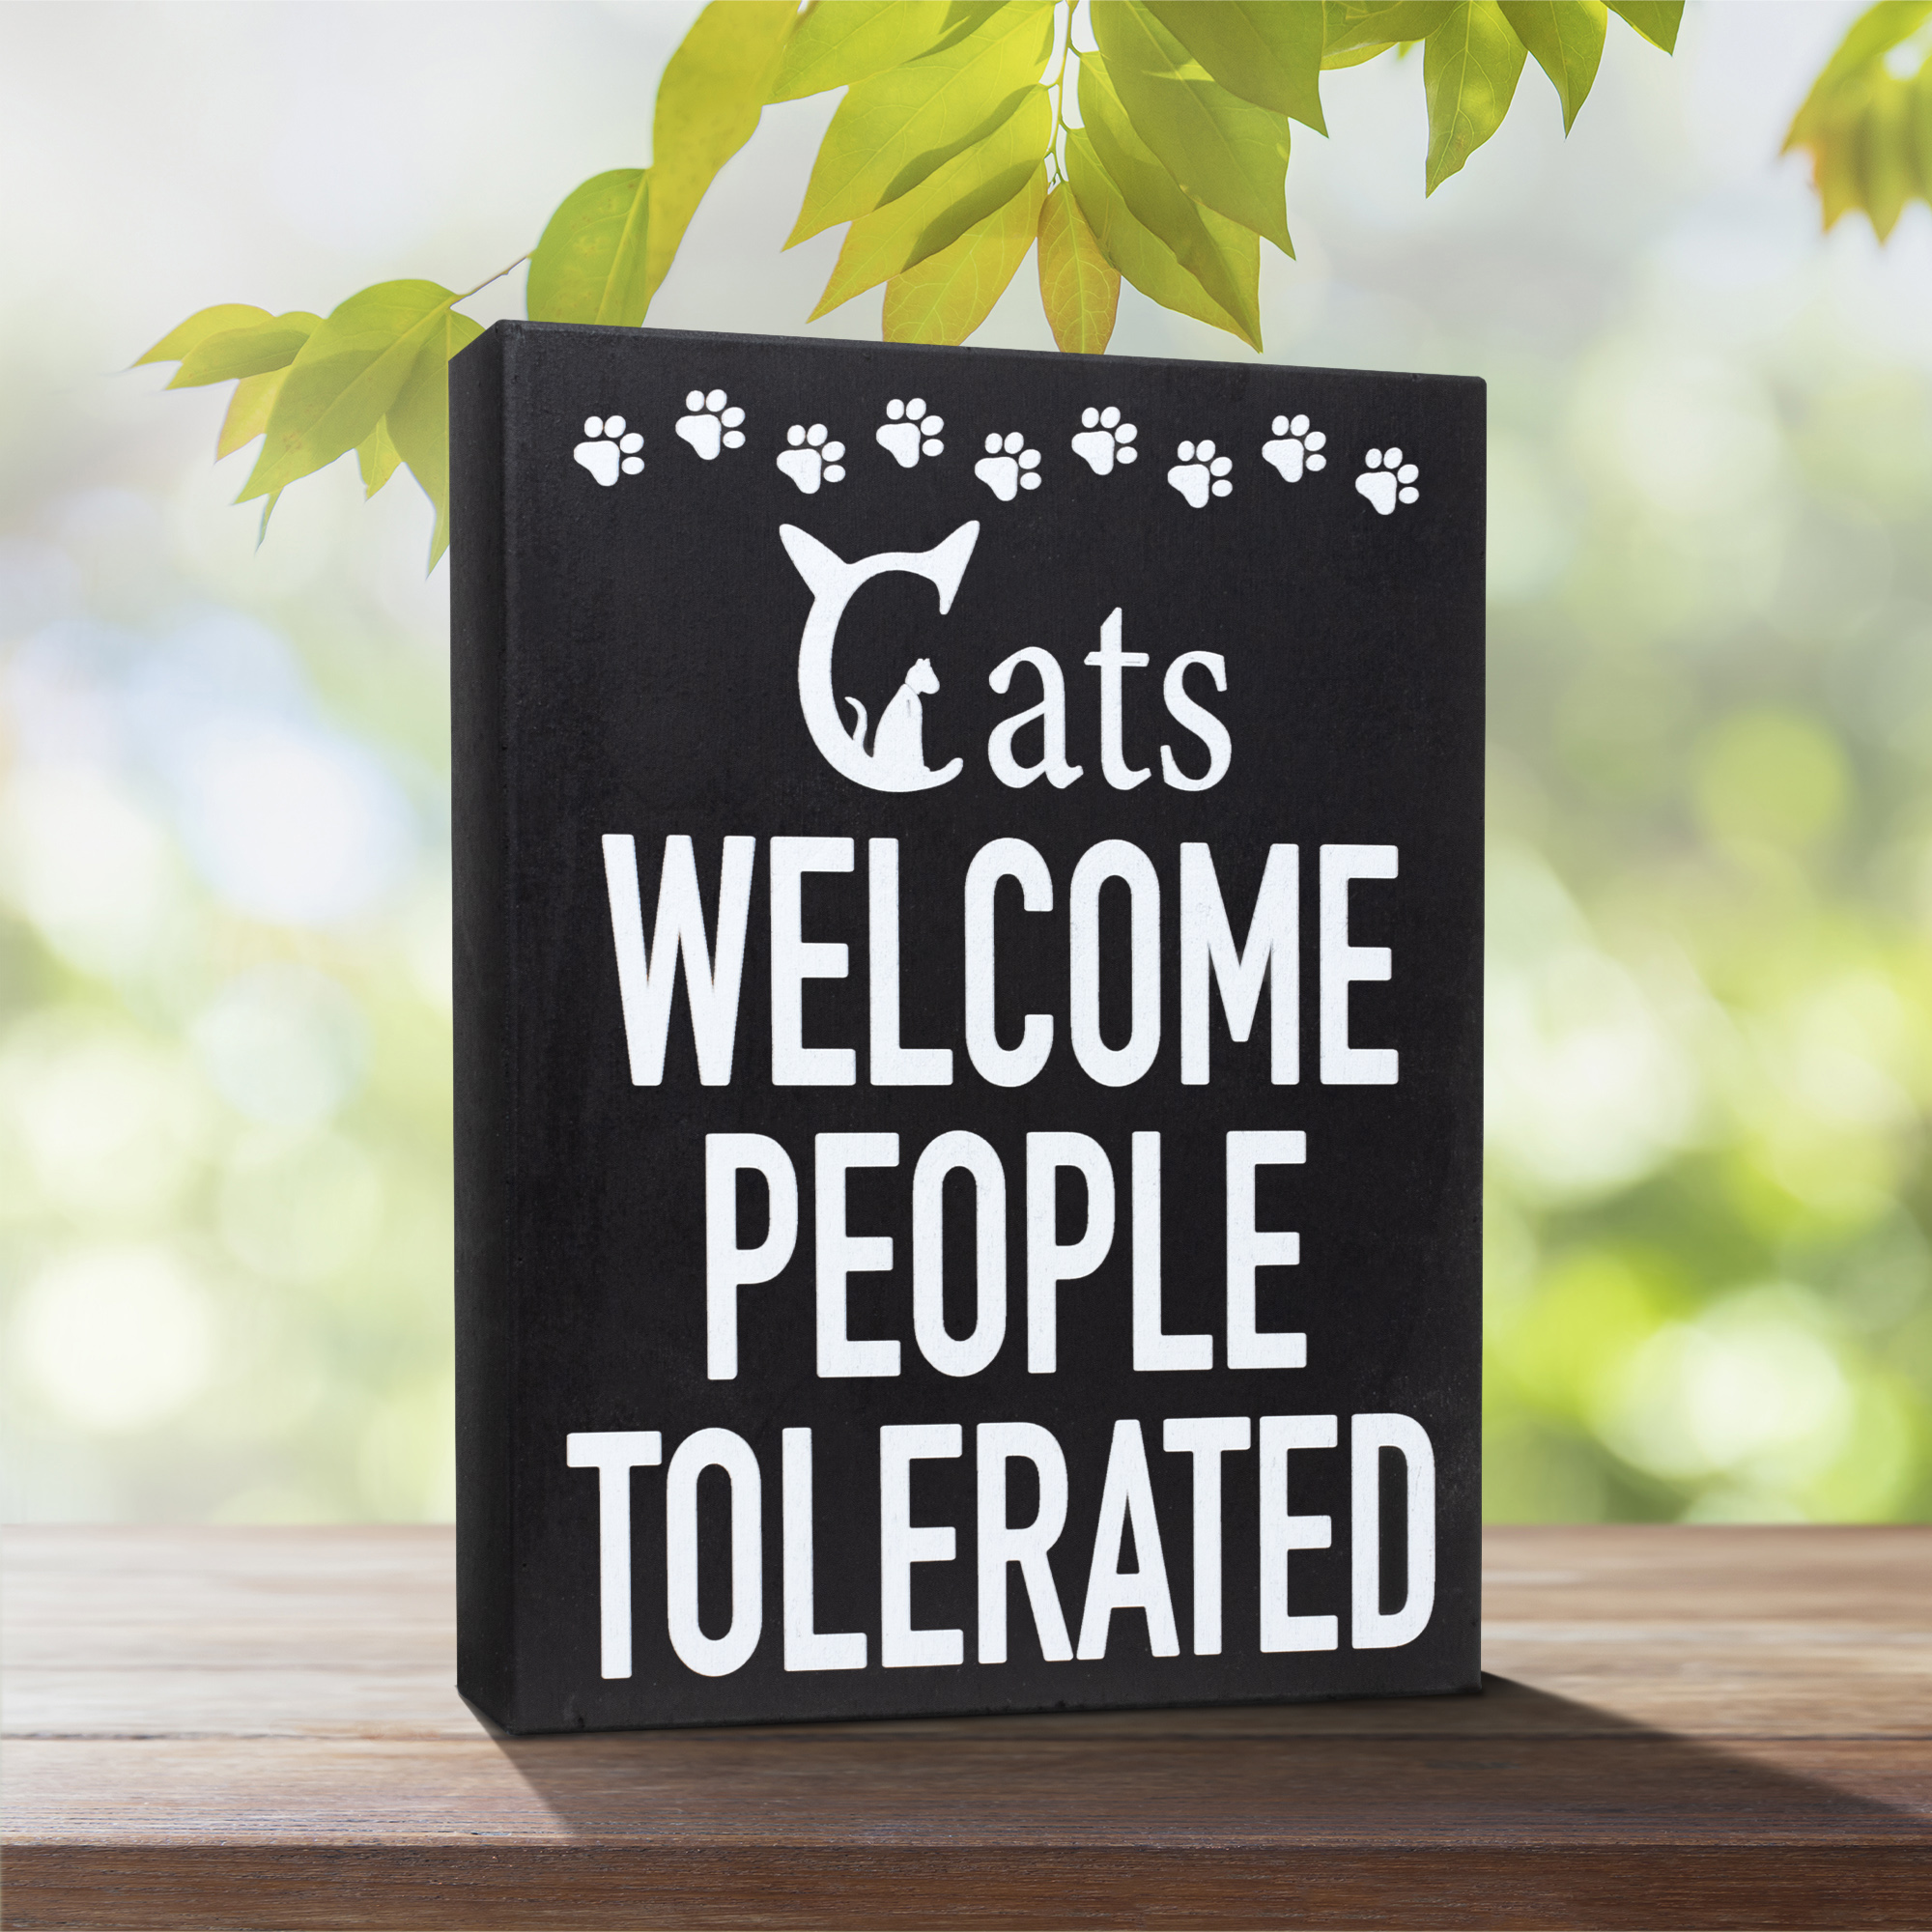 decorative sign saying "Cats welcome, people tolerated"